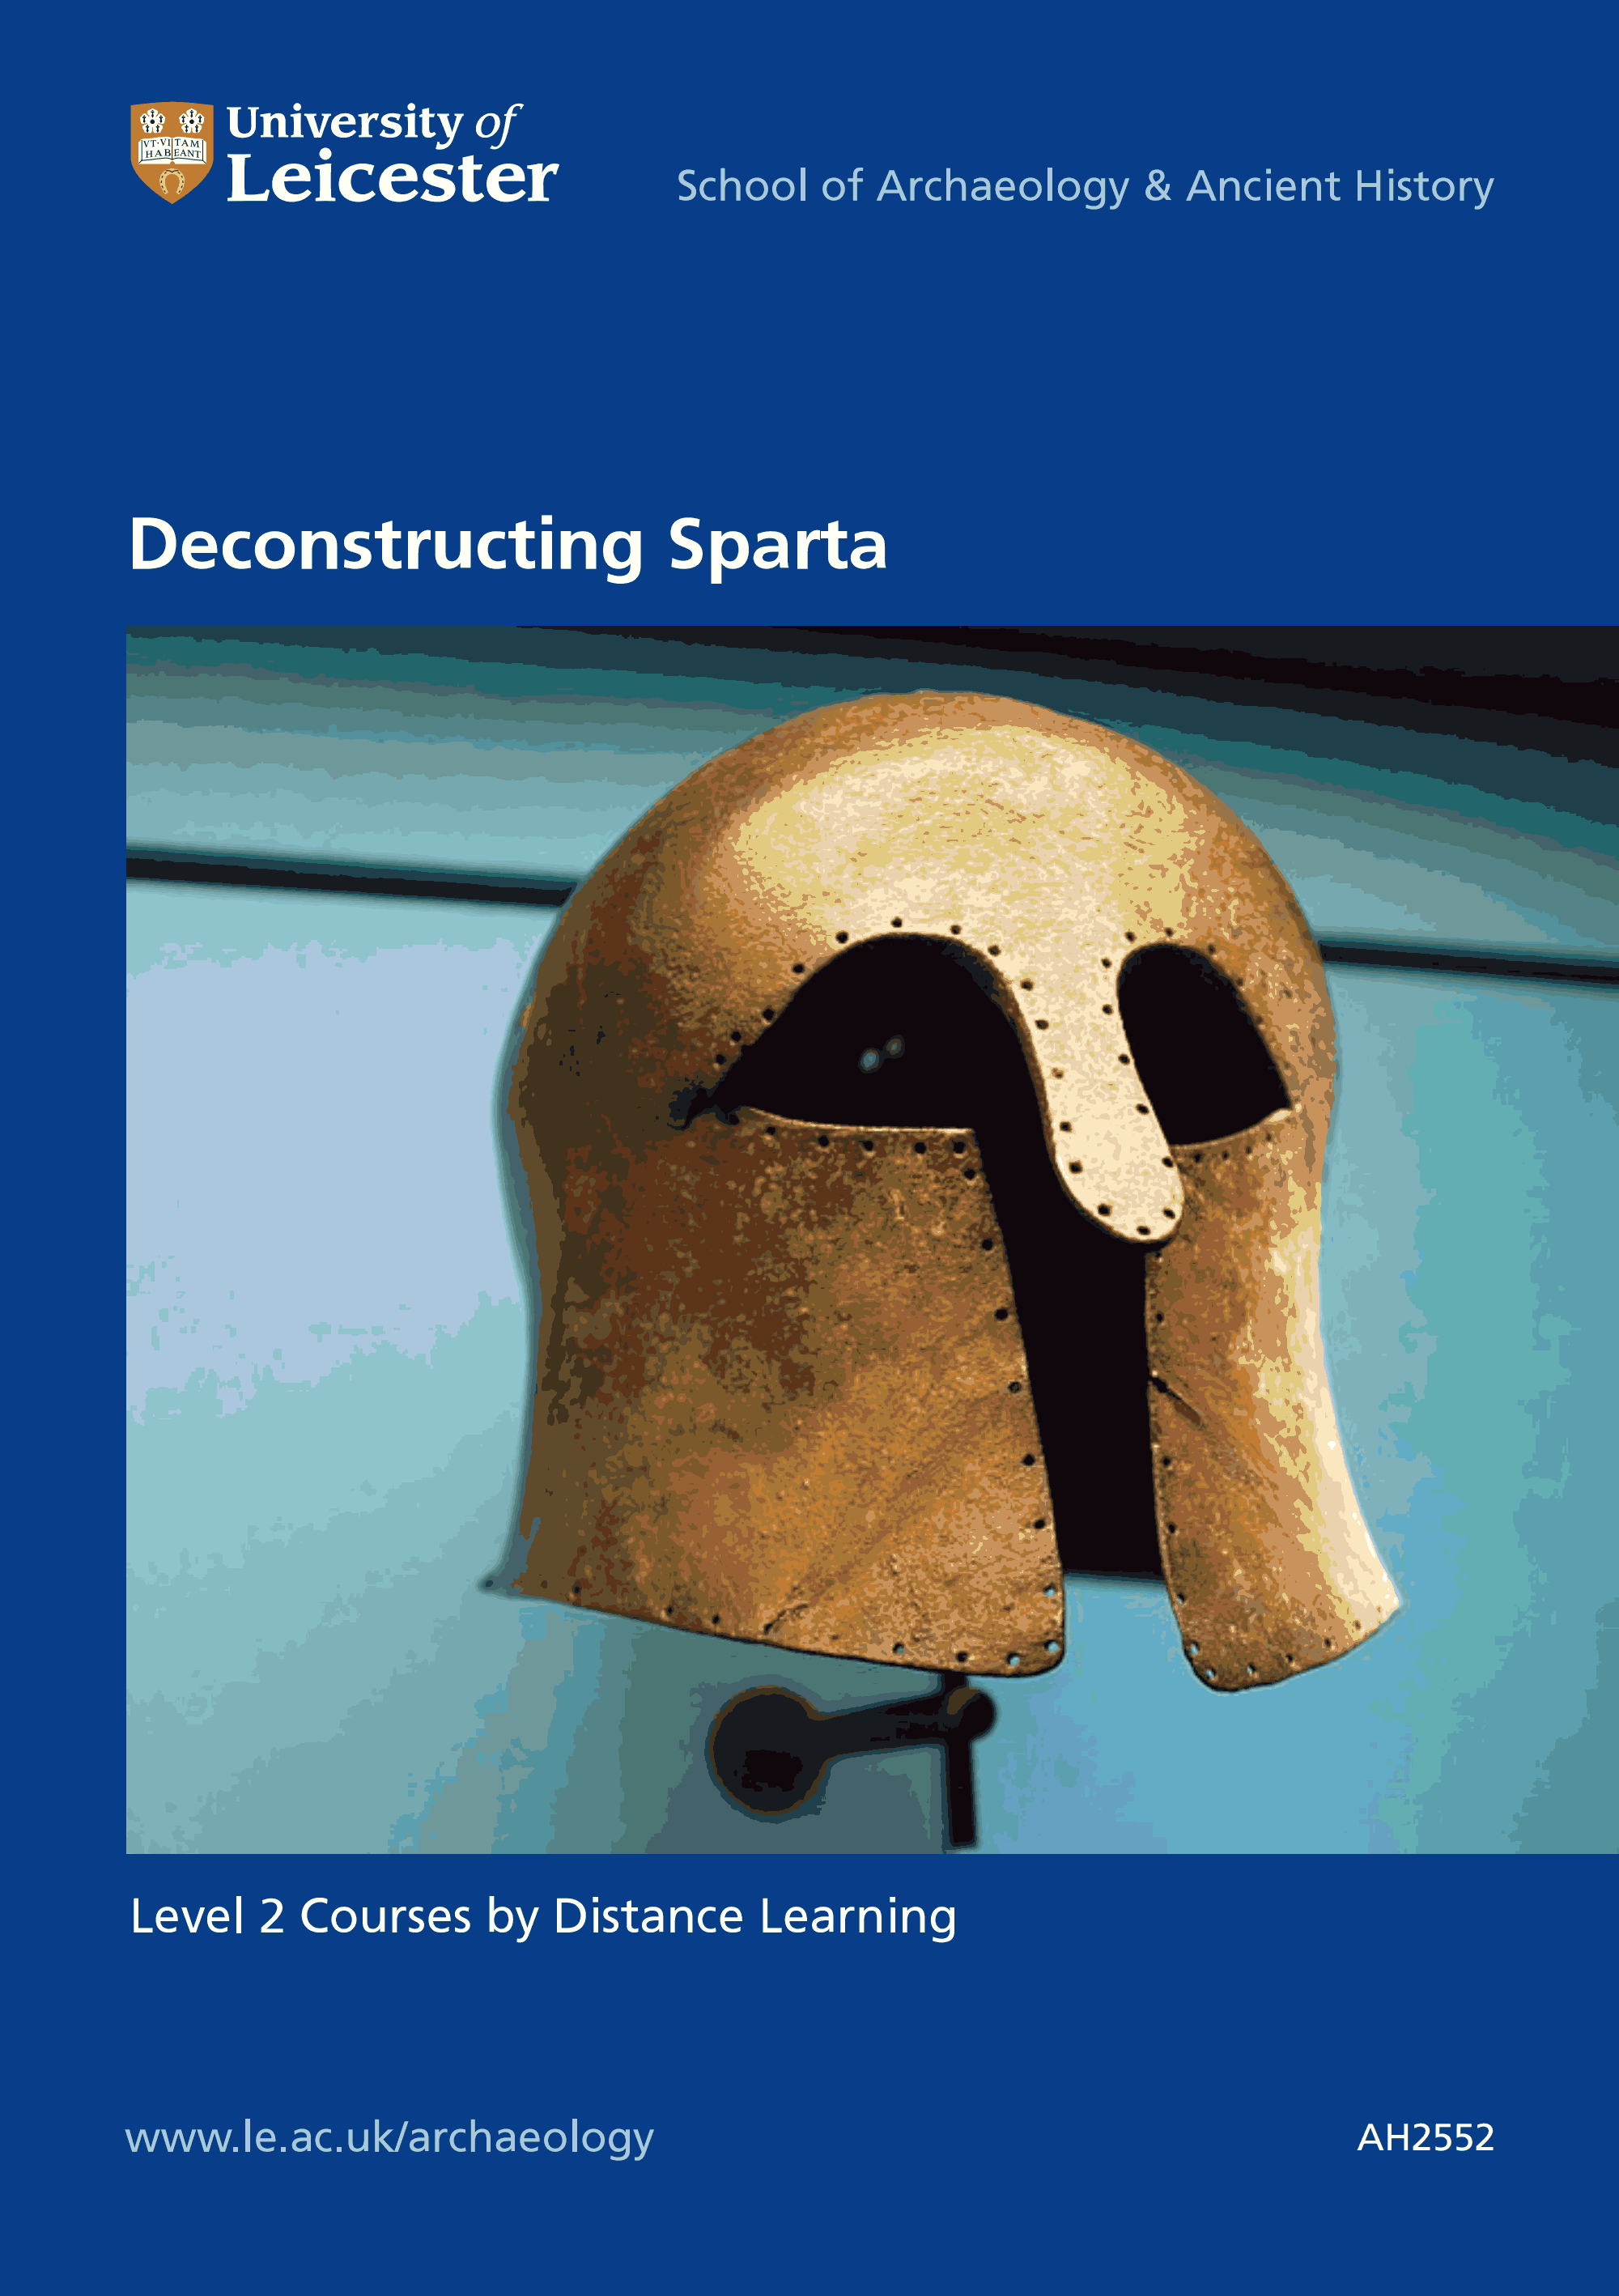 "Deconstructing Sparta": Distance-Learning Course at Leicester University